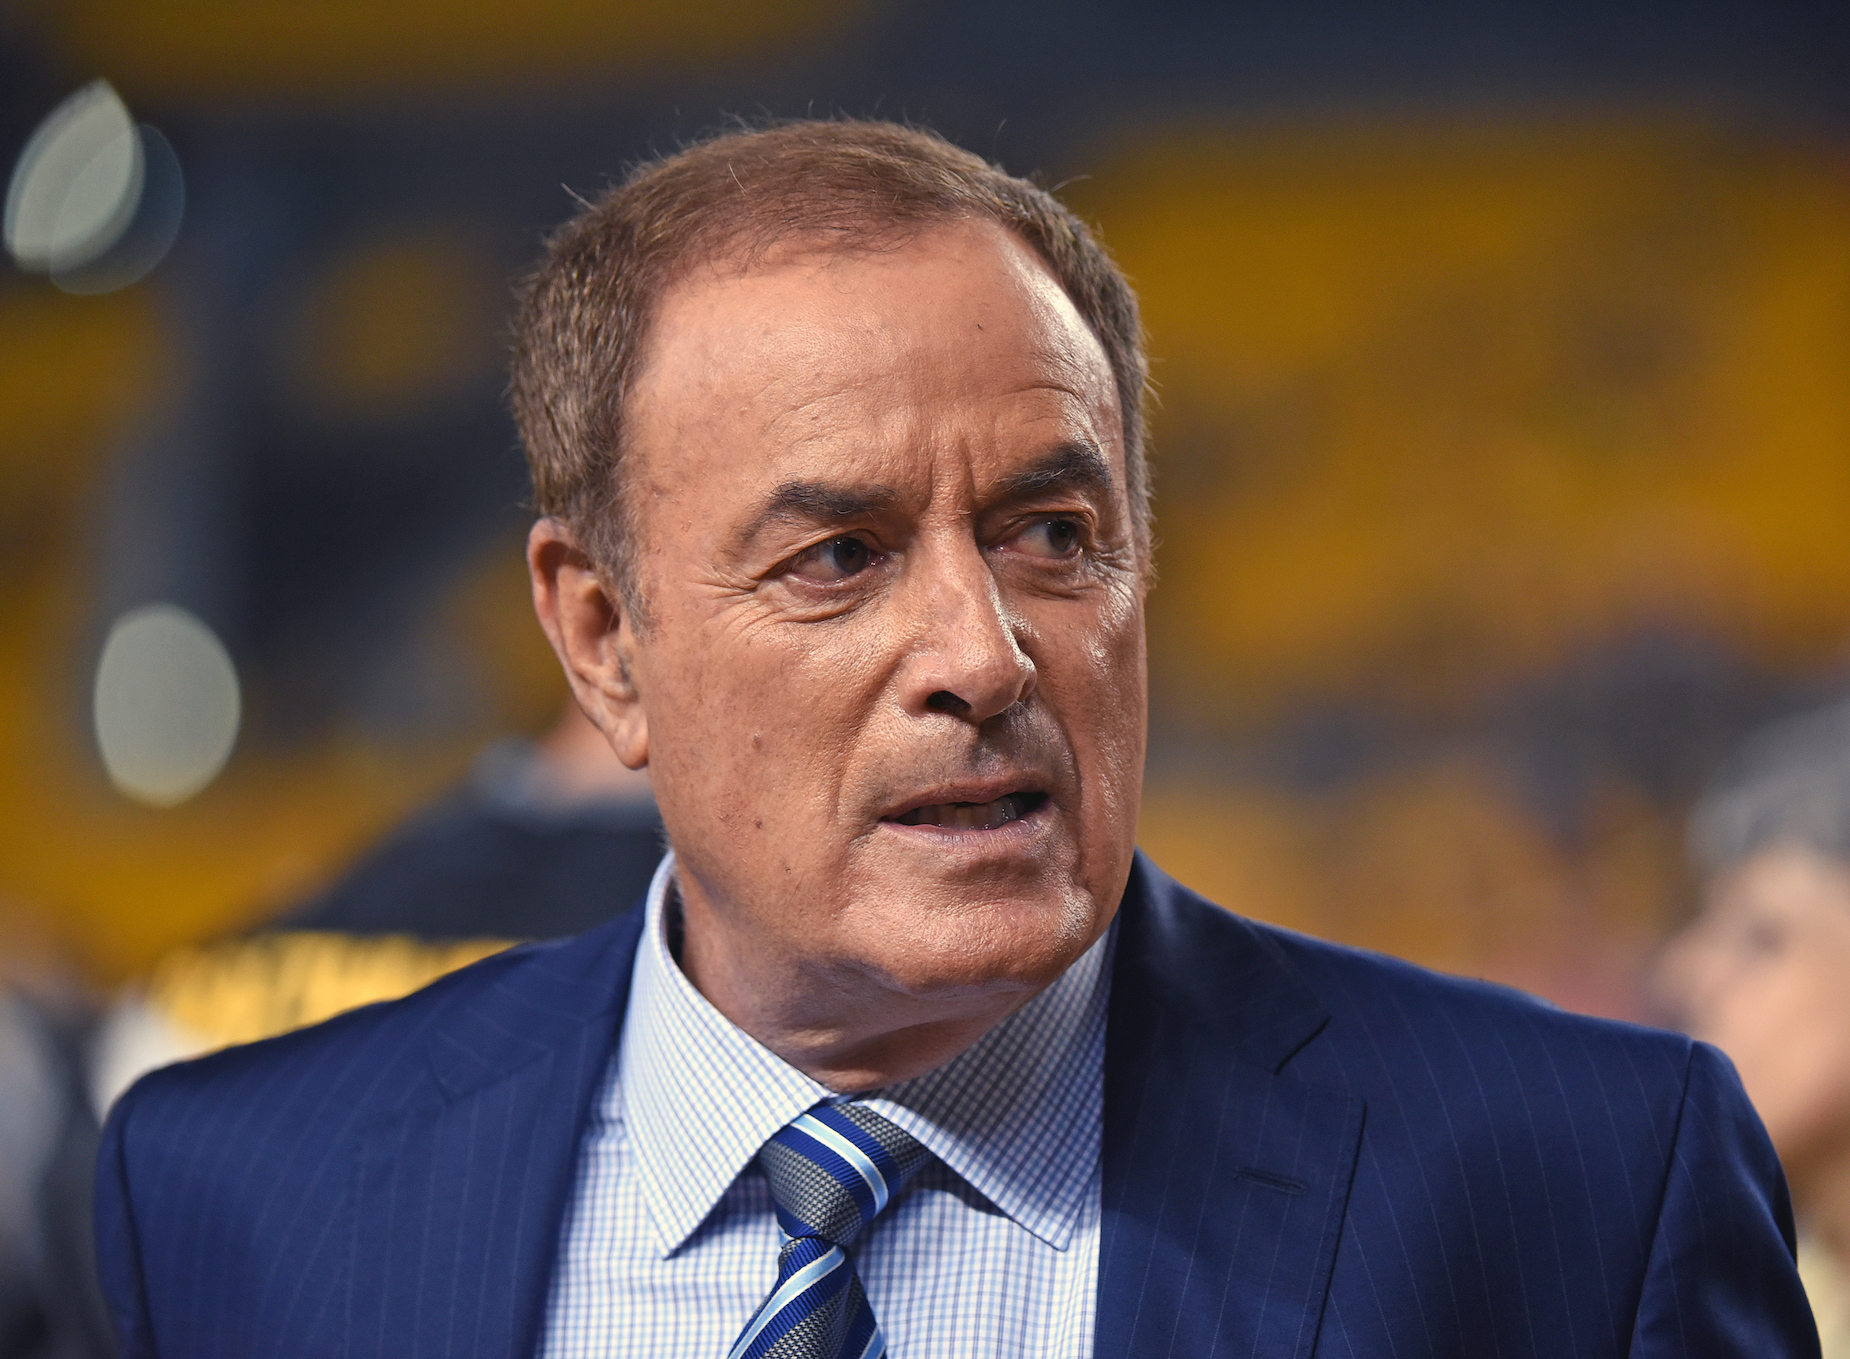 While NBC's Al Michaels is a respected media veteran, he once cracked a regrettable Harvey Weinstein joke during Sunday Night Football.